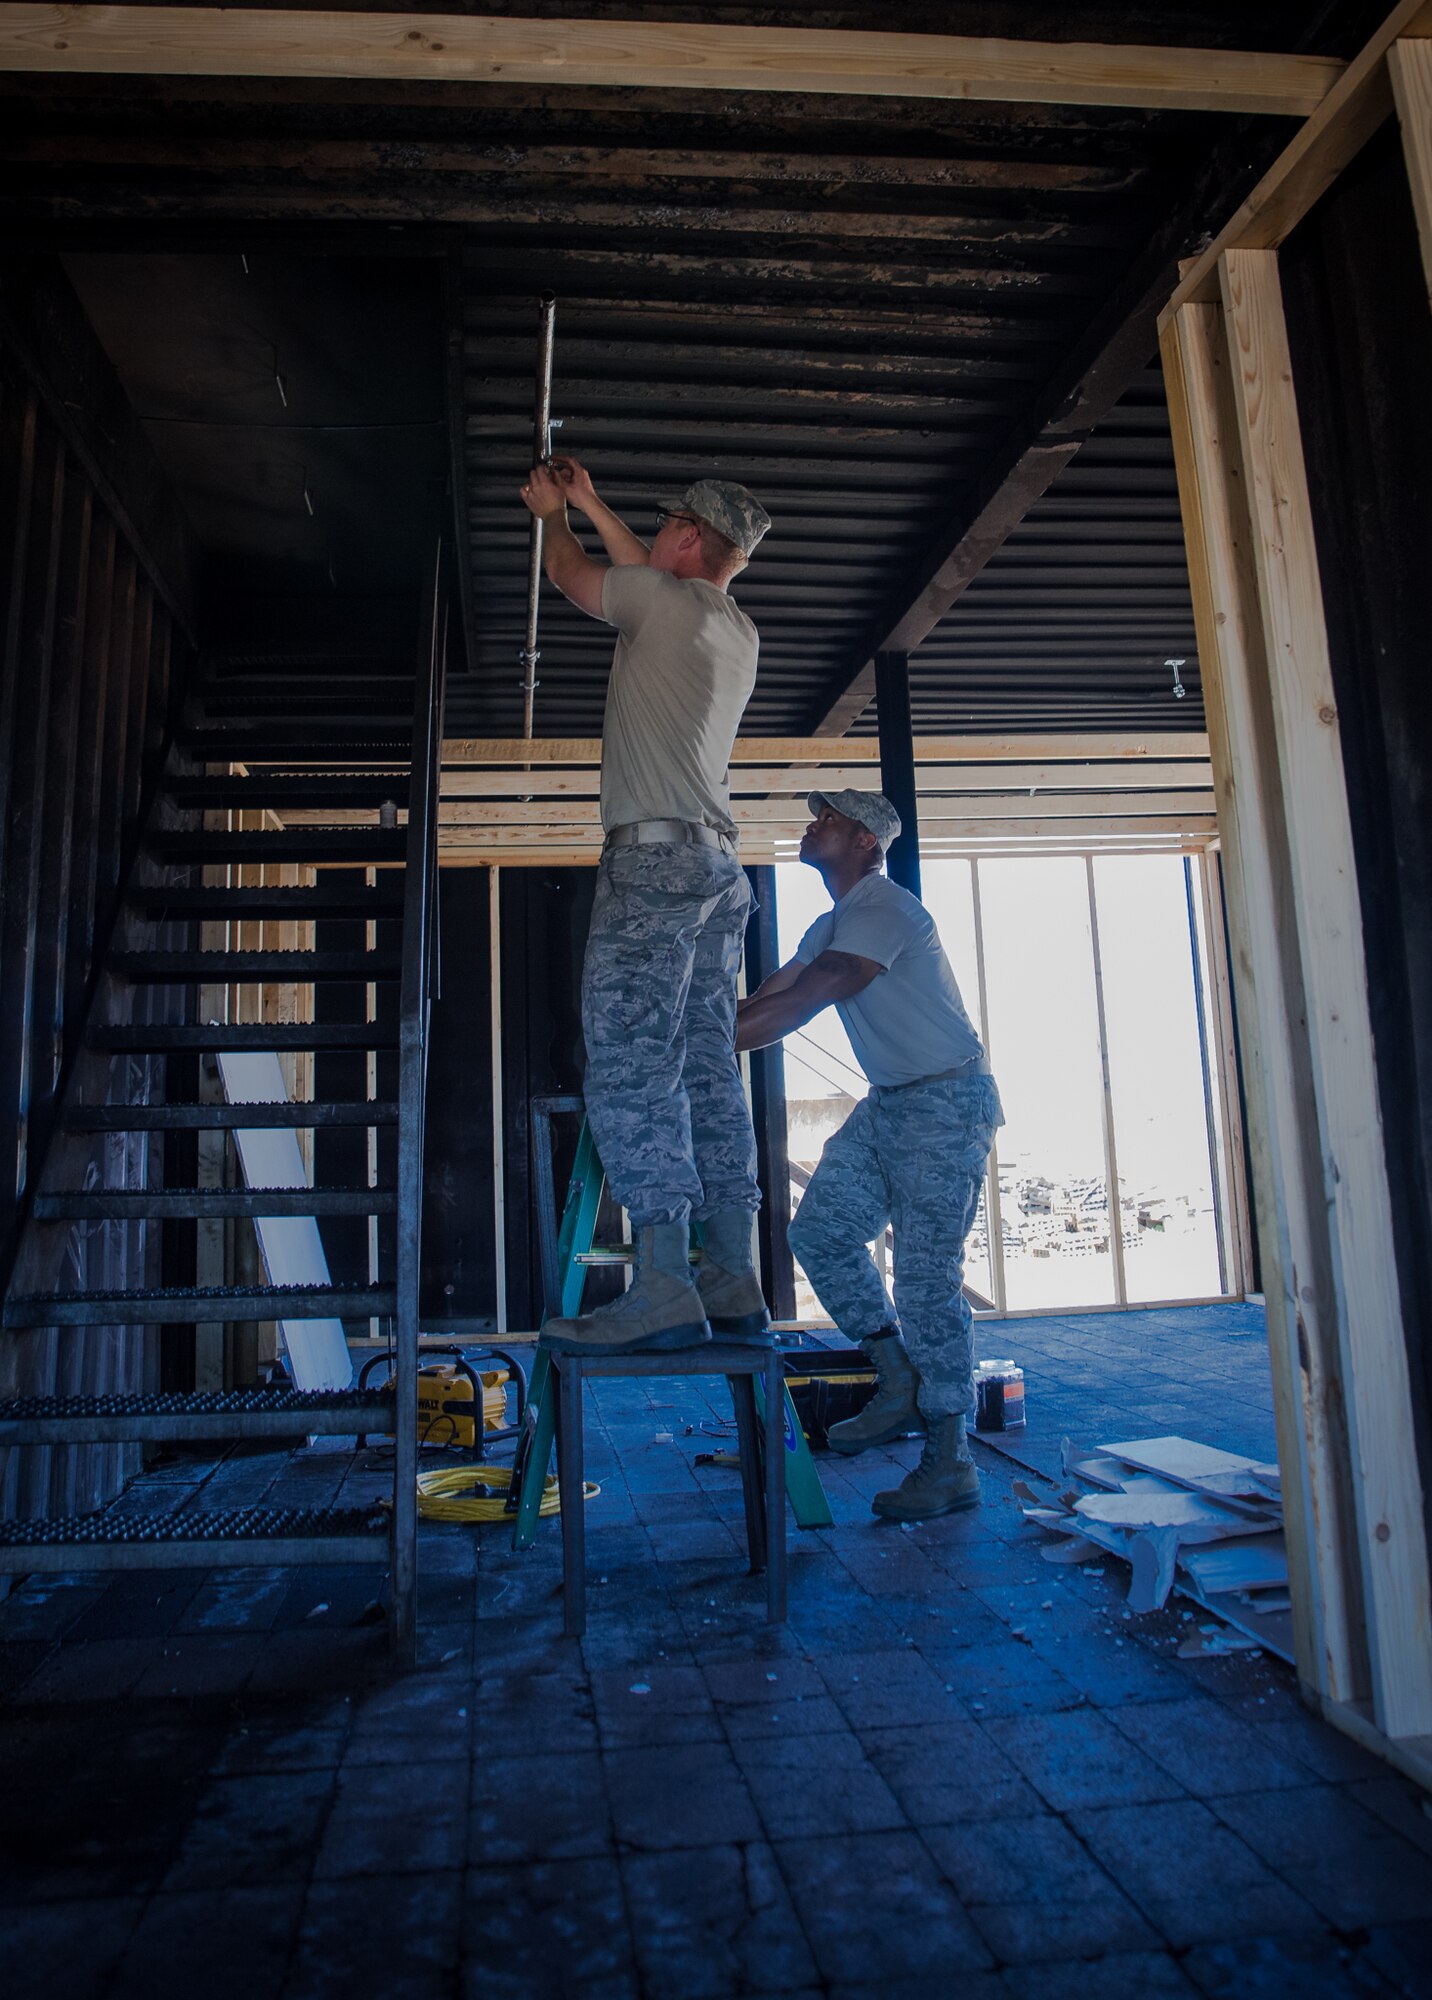 U.S. Air Force Airmen assigned to the 153rd Civil Engineer Squadron assist  Laramie County Fire District #2 with preparing their fire training structure for the upcoming Honoring Tradition, Leading Change Conference, May 6, 2017 in Cheyenne, Wyoming. The engineers were asked to install walls to create various rooms and add a fire suppression system within the district’s training structure. The project provided the water and fuels systems maintenance flight and the structural flight Airmen a chance to maintain their proficiency while helping the community. (U.S. Air National Guard photo by Tech. Sgt. John Galvin/Released)